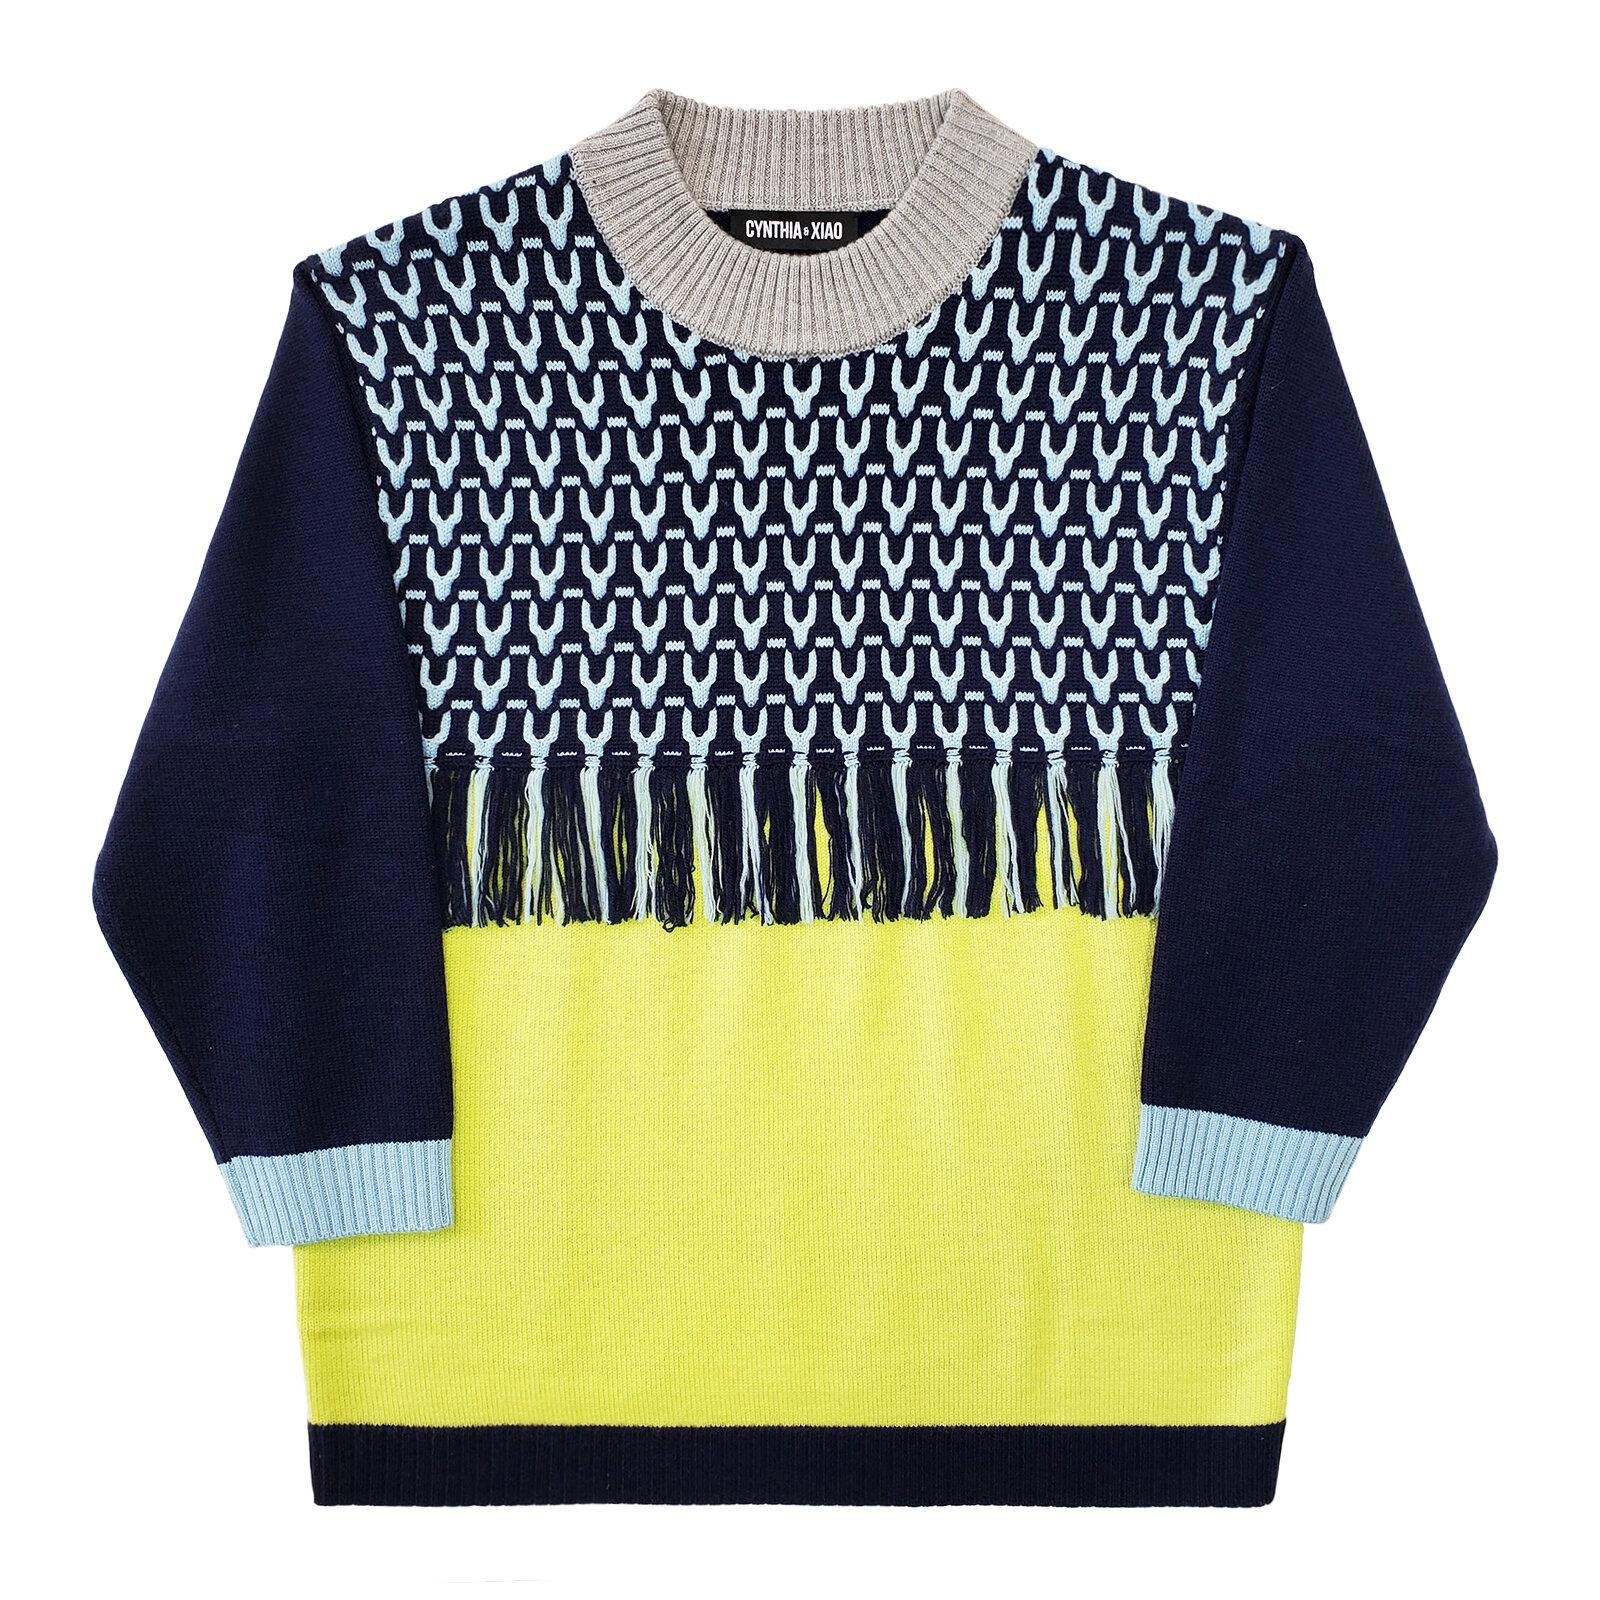 navy cable oversize knit top knit sweaterneon anglerfish oversize knit sweater by CYNTHIA AND XIAO